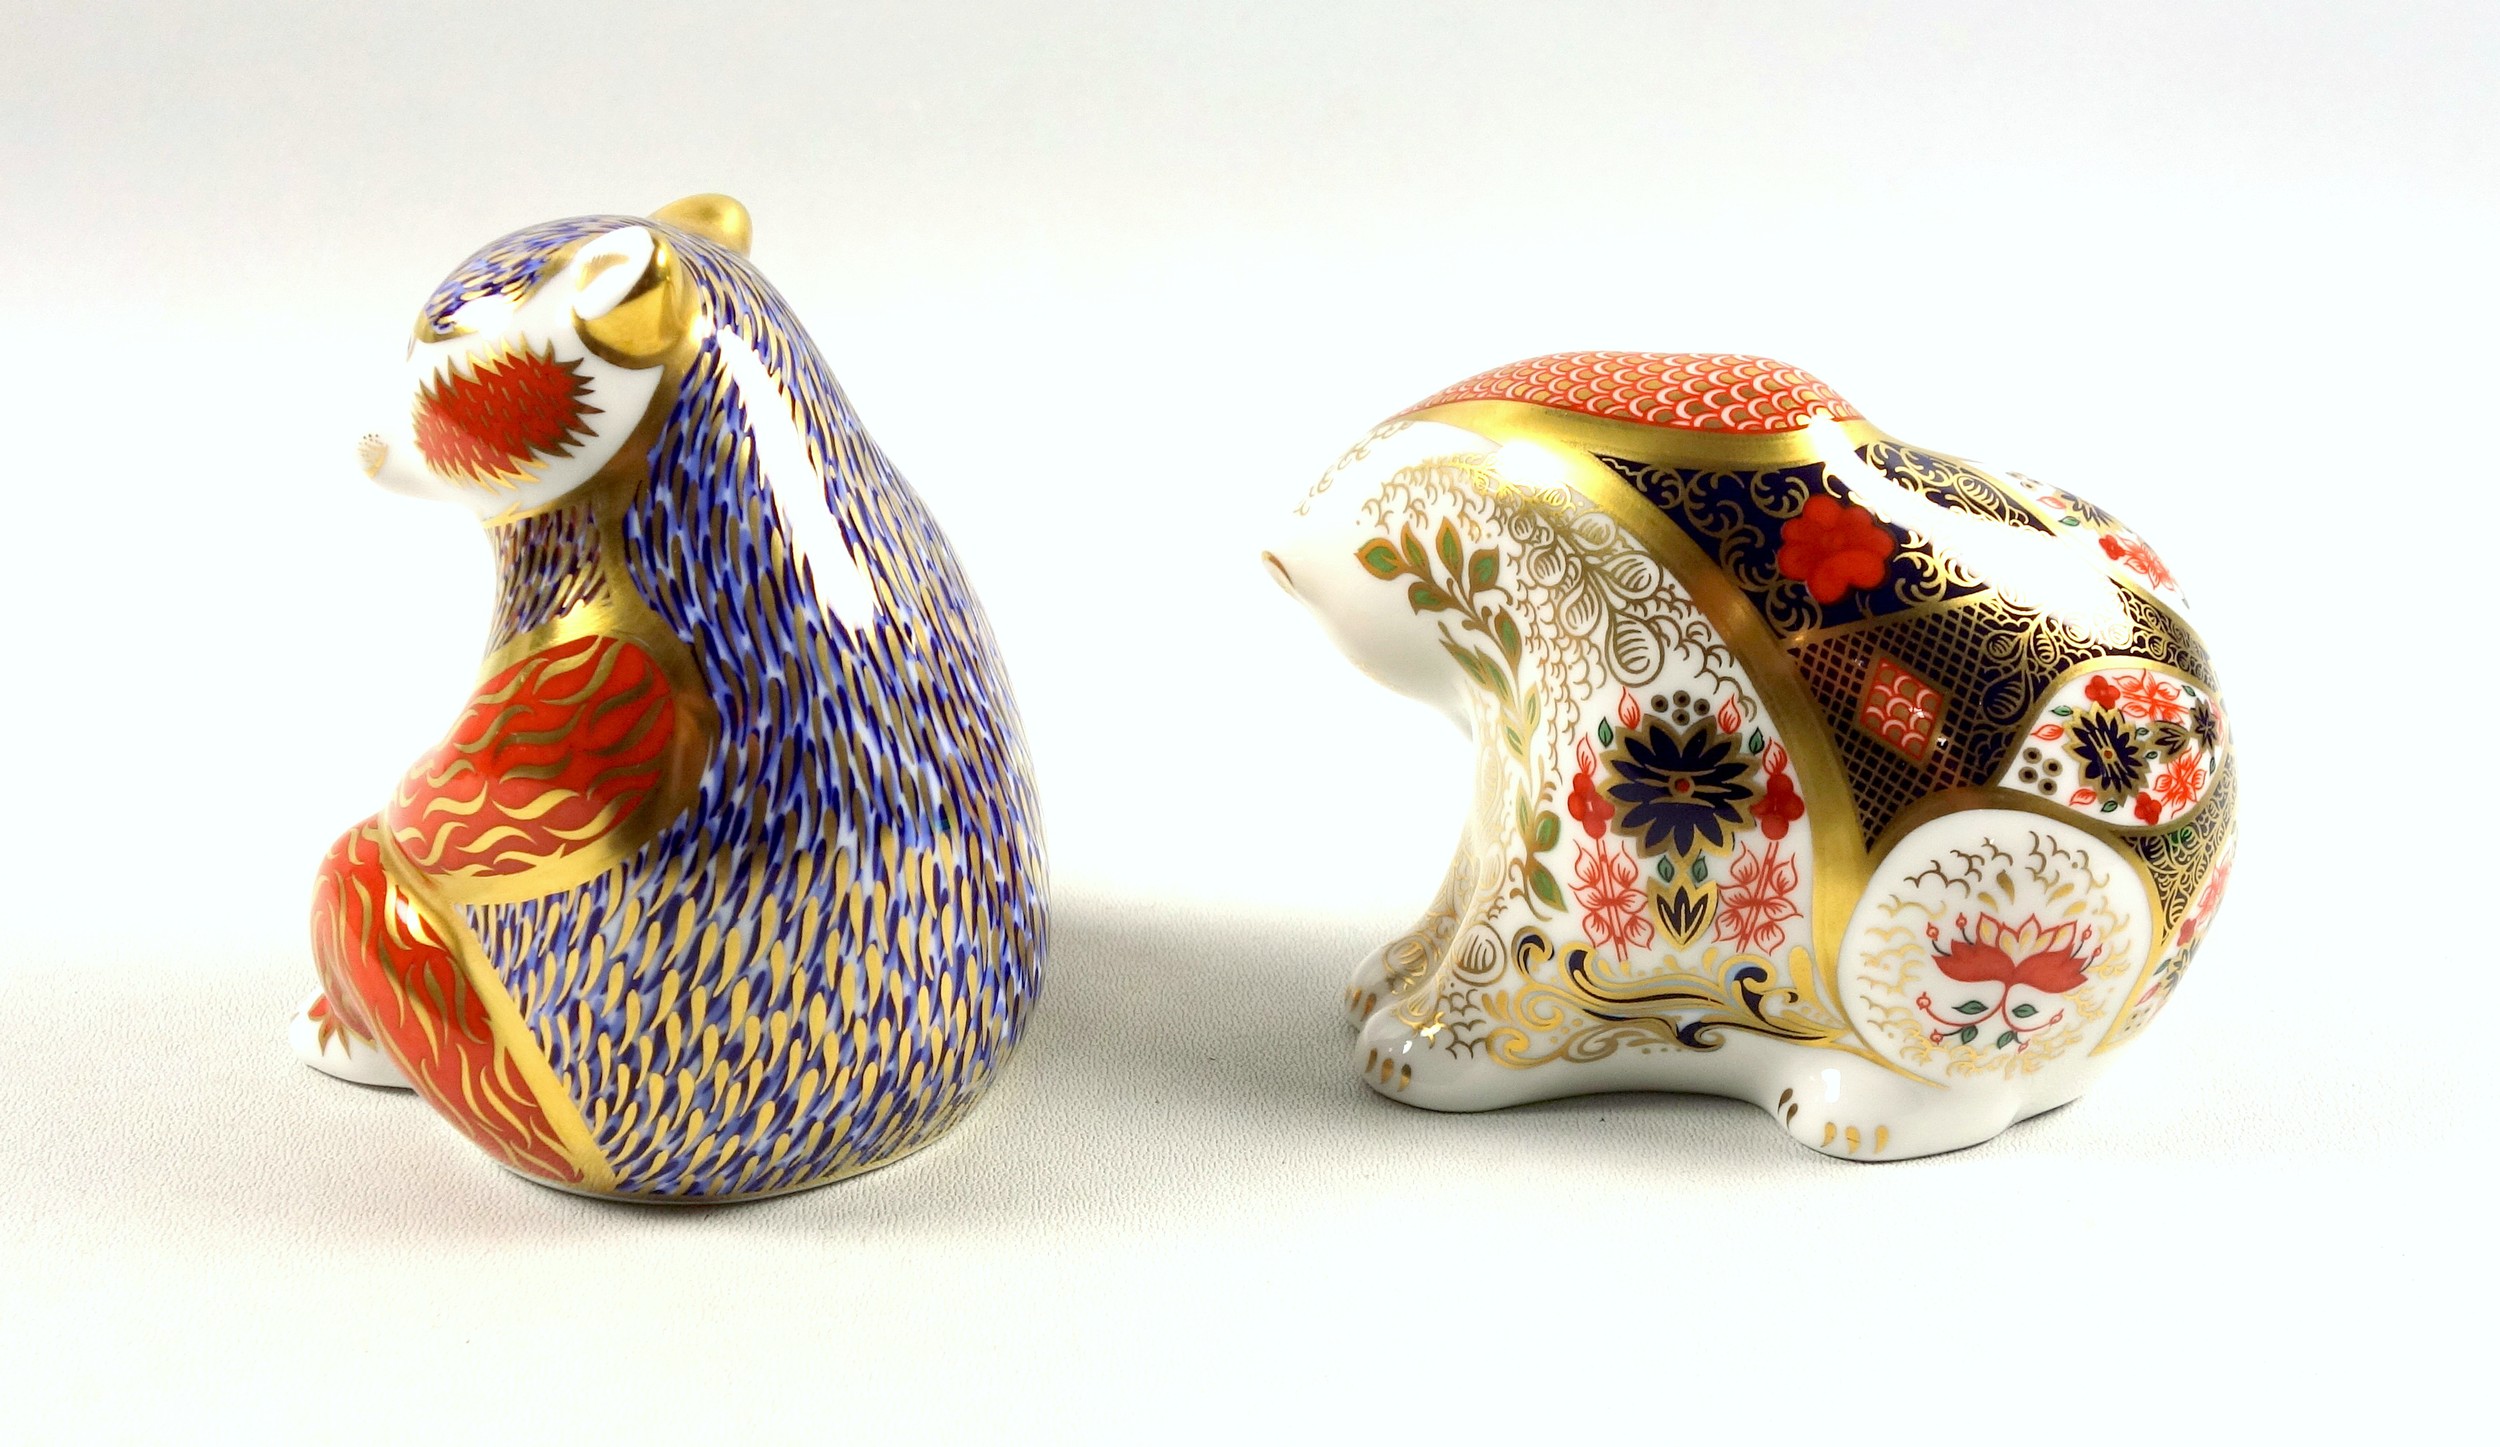 Royal Crown Derby "Honeybear" paperweight, H.10cm and an Imari pattern "Rocky Mountain bear", W. - Image 3 of 5